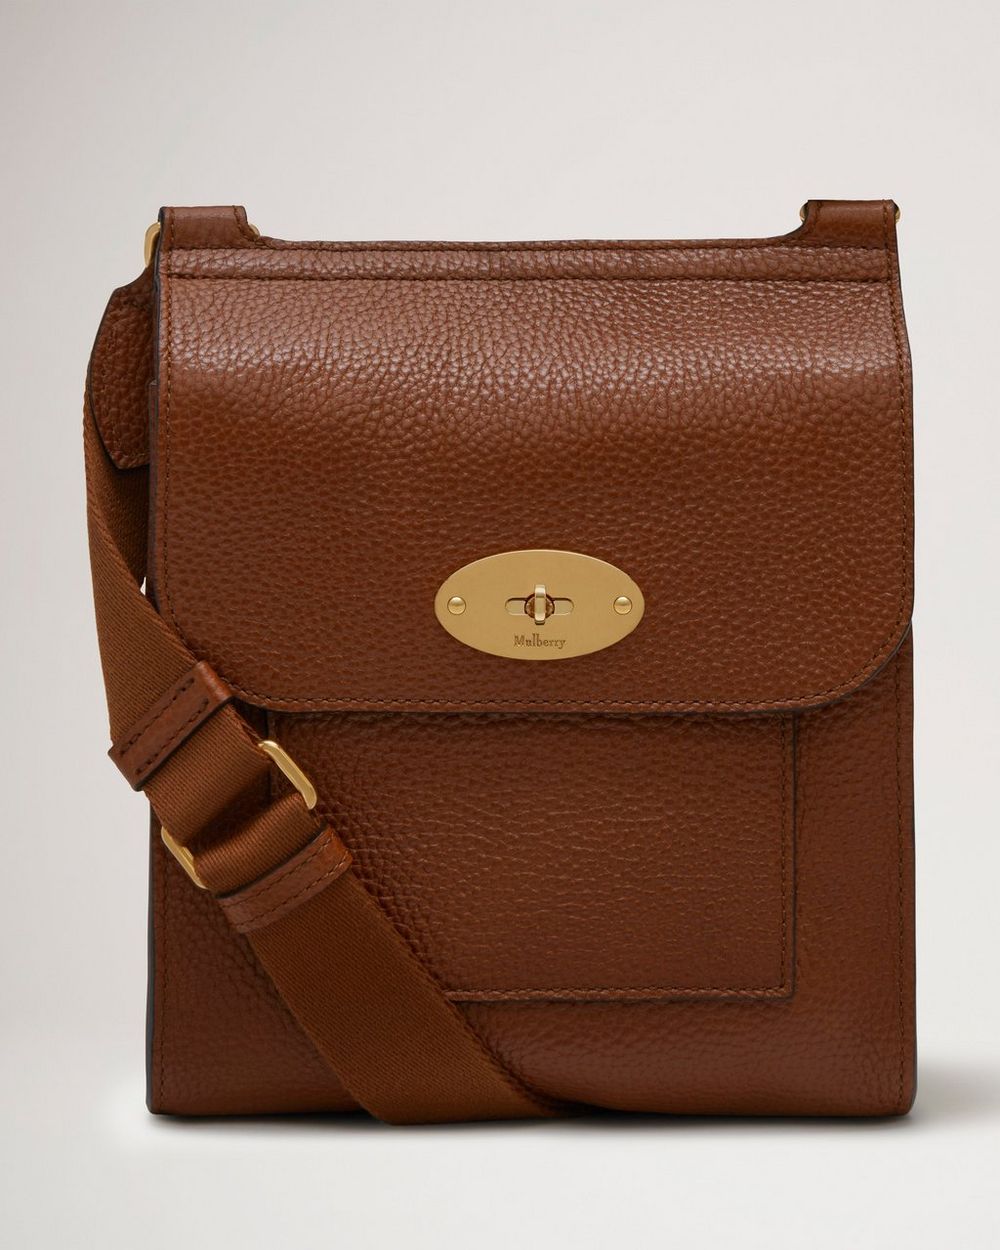 Mulberry small Antony N shoulder bag - ShopStyle